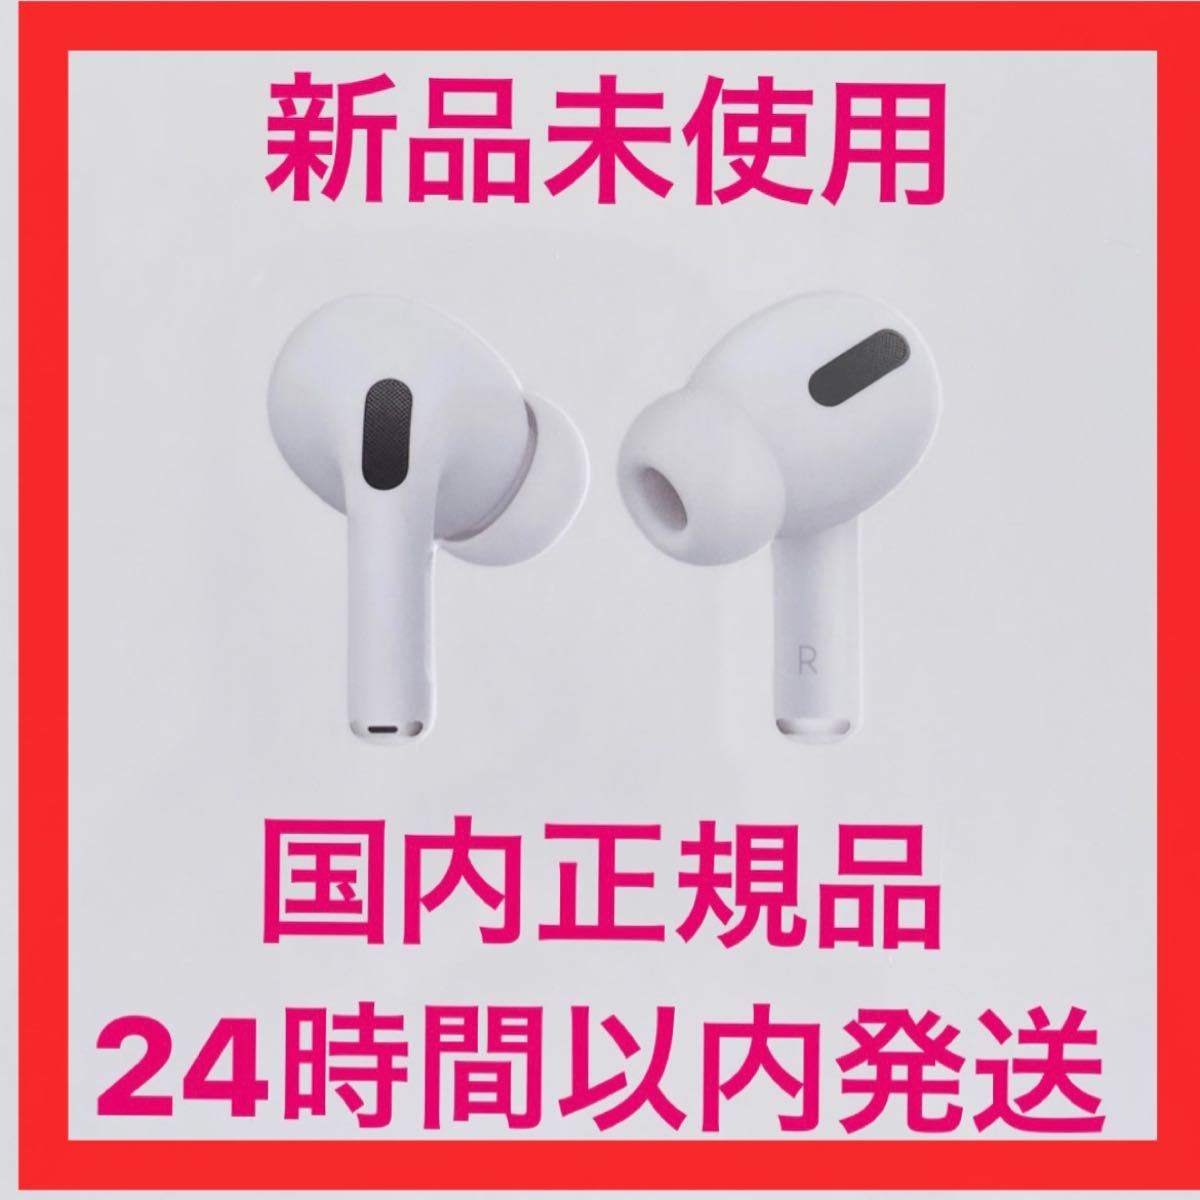 AirPods Pro イヤホン 左耳のみ 